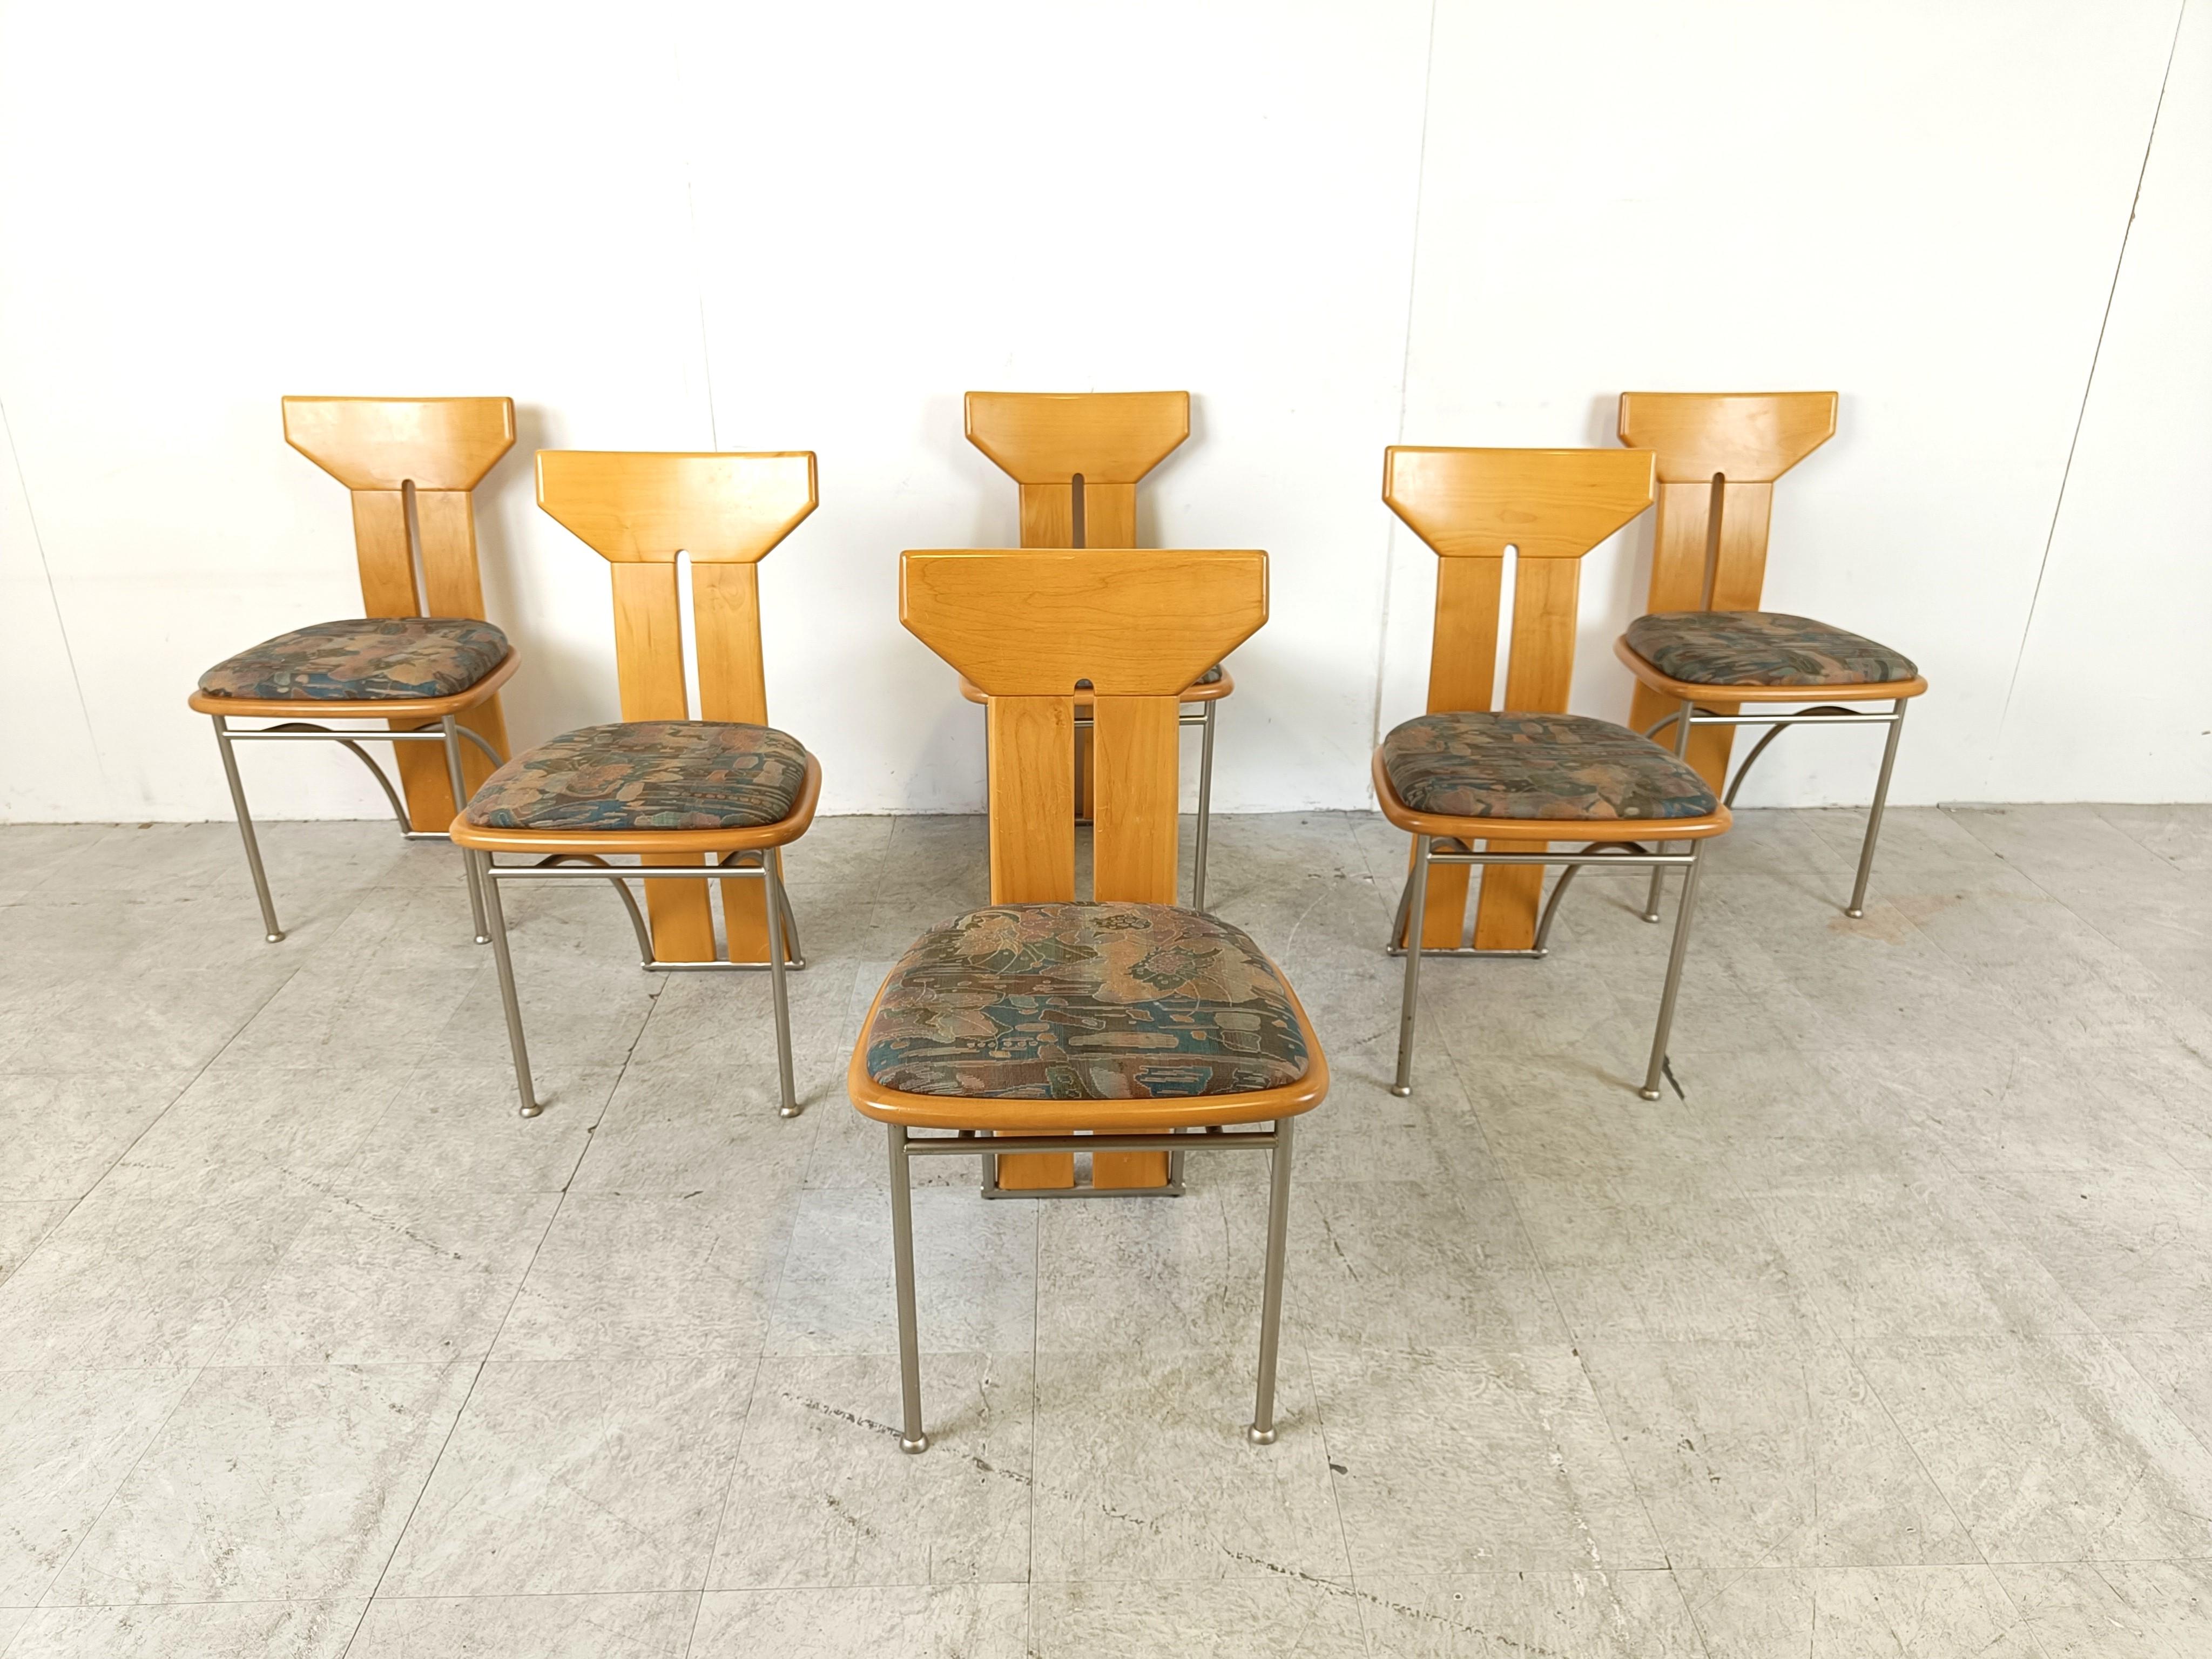 Set of 6 italian dining chairs with a clear oak wooden frame, original floral fabric upholstery and bent metal front legs.

Beautifully designed backrest.

1980s-  Italy

Very good condition

We can have these chairs reupholstered in other fabrics,